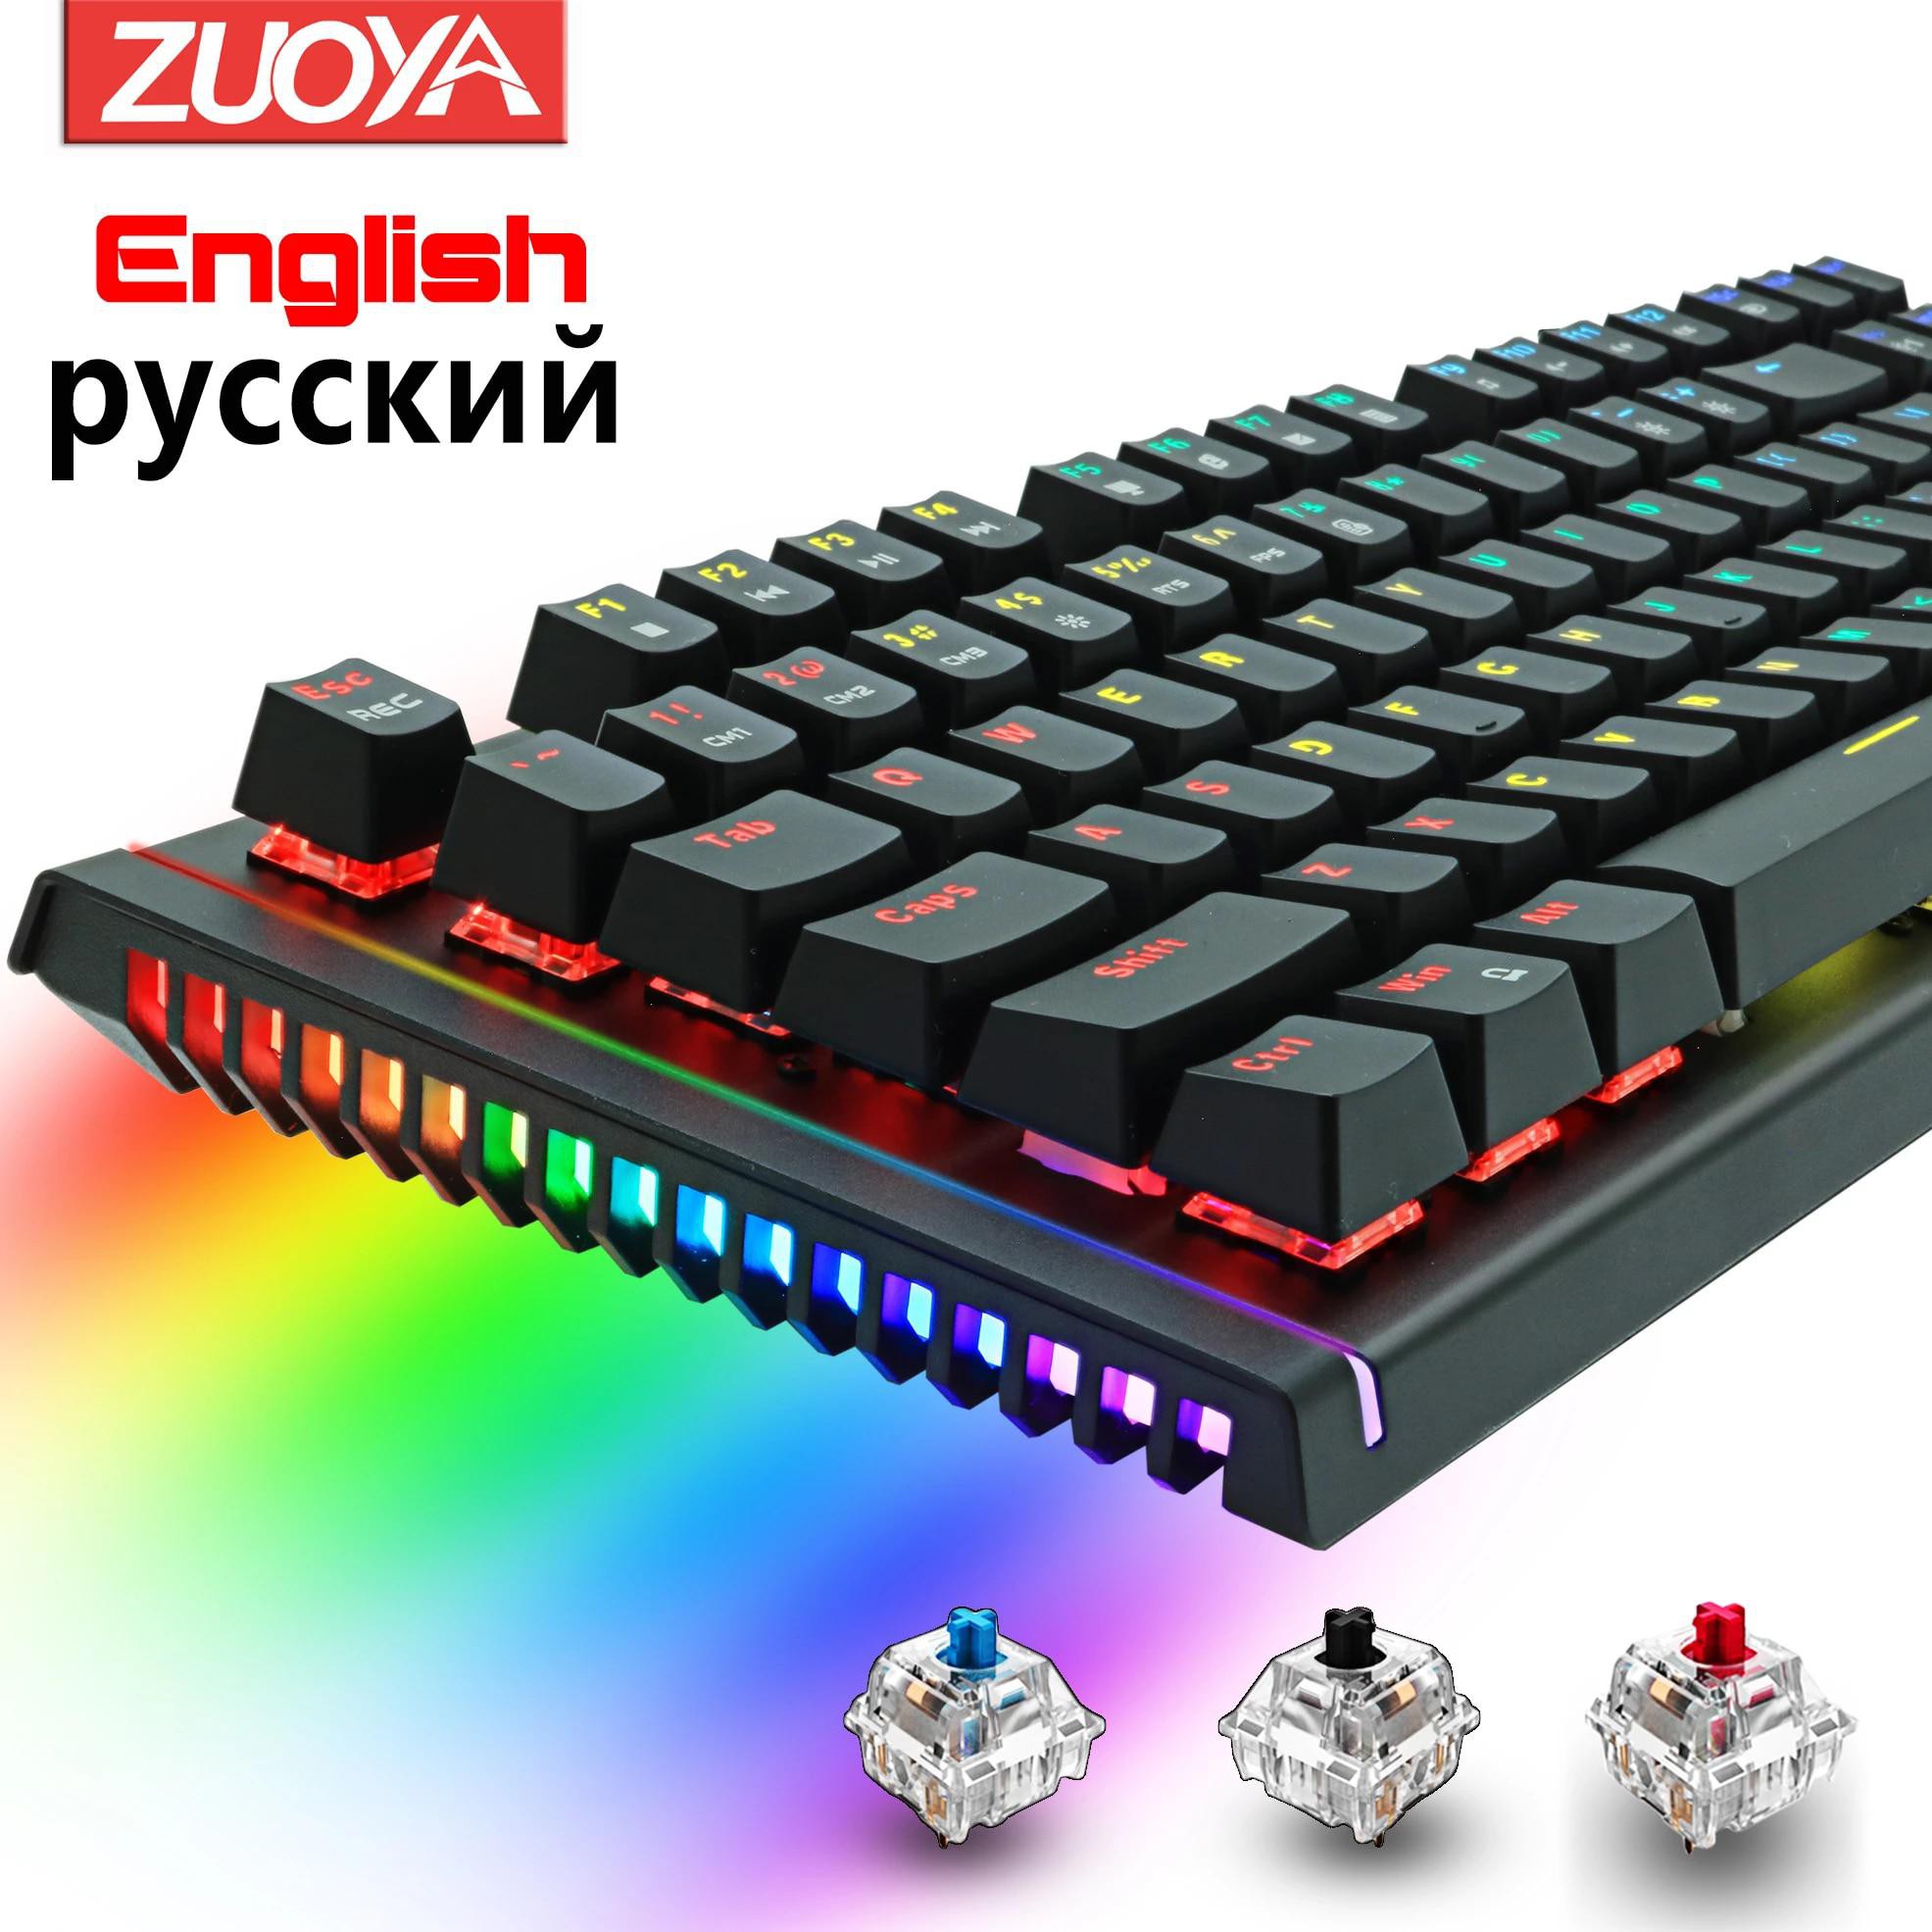 Mechanical Keyboard Wired Gaming Keyboard RGB Mix Backlit 87 104 Anti-ghosting Blue Red Switch For Game Laptop PC Russian US